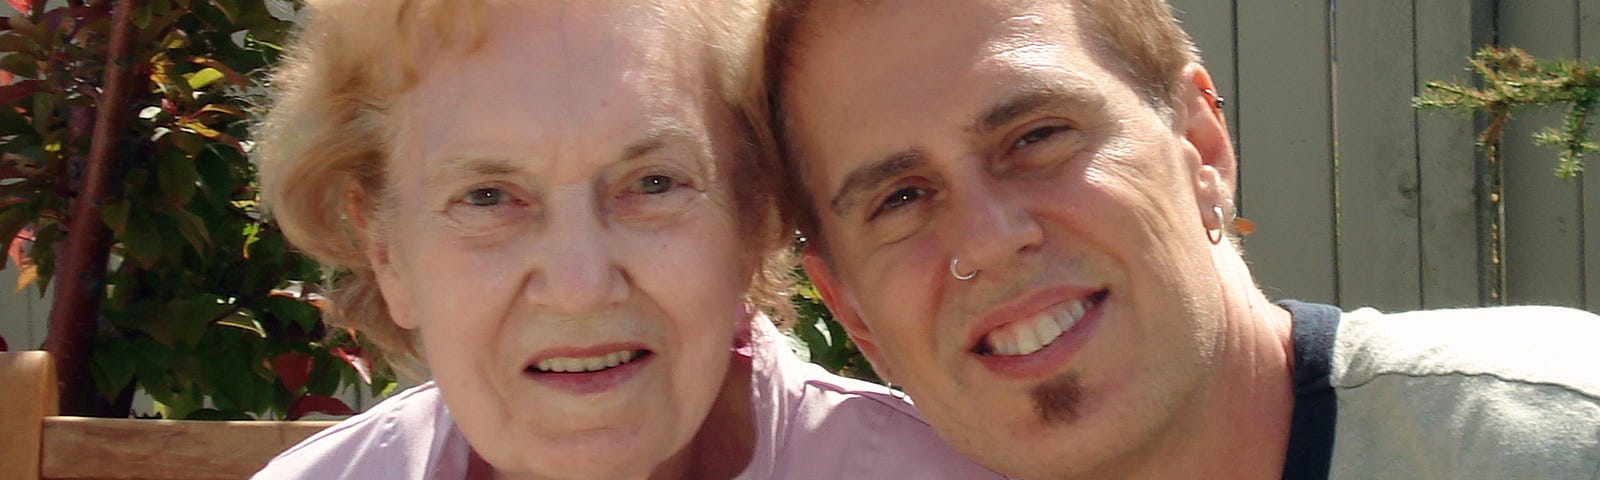 Elderly woman looks into the camera — young man has his arm around her smiling.